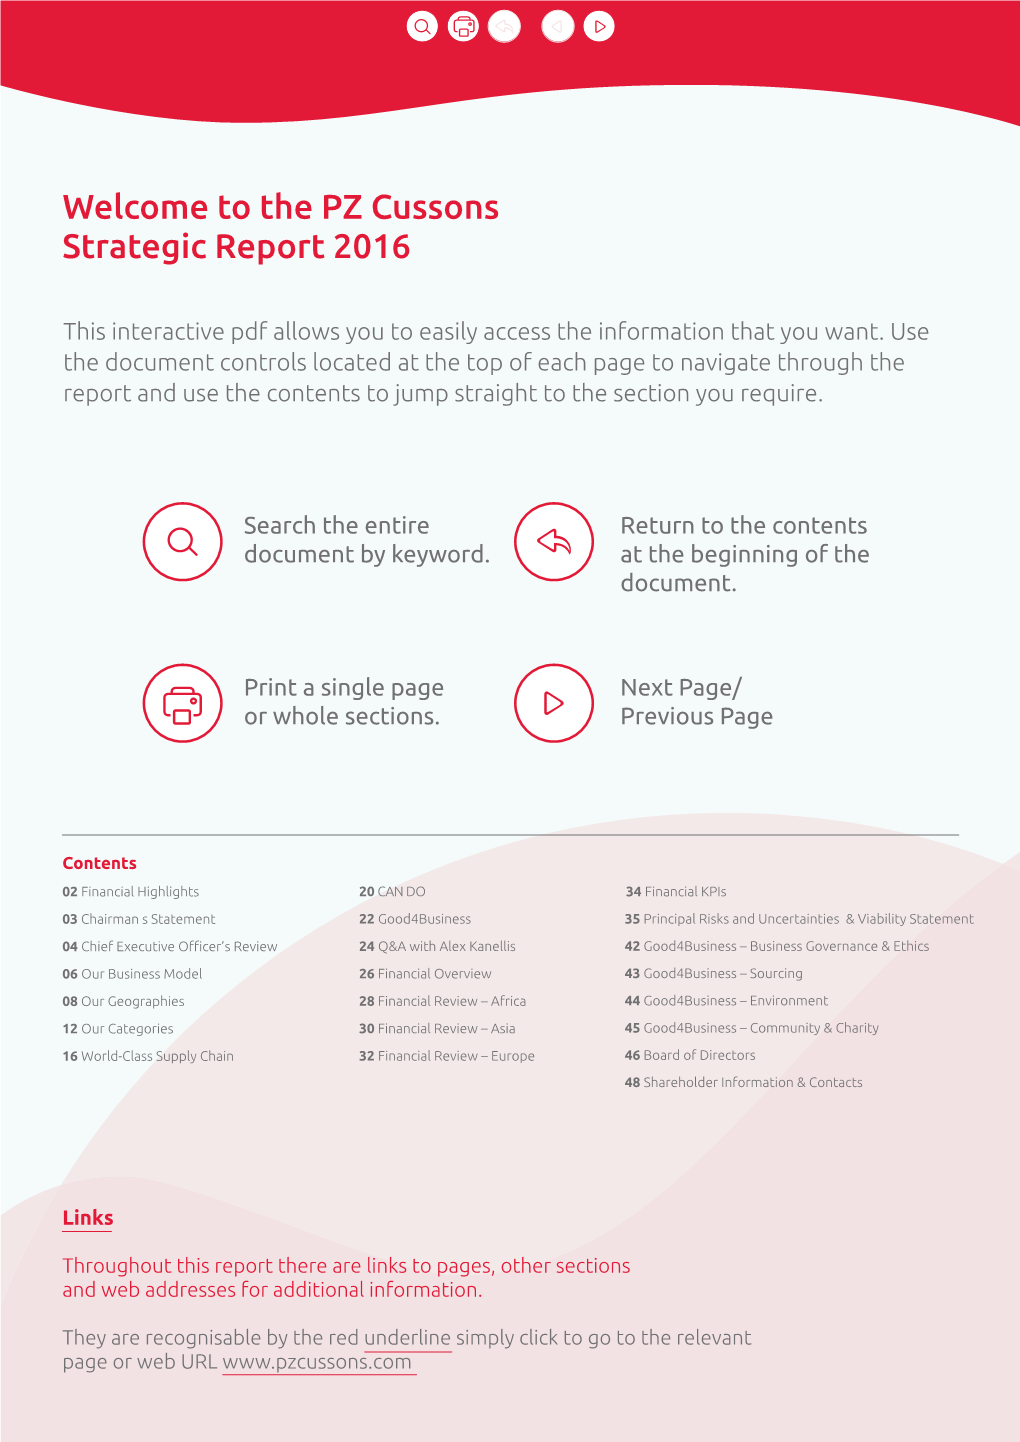 Welcome to the PZ Cussons Strategic Report 2016